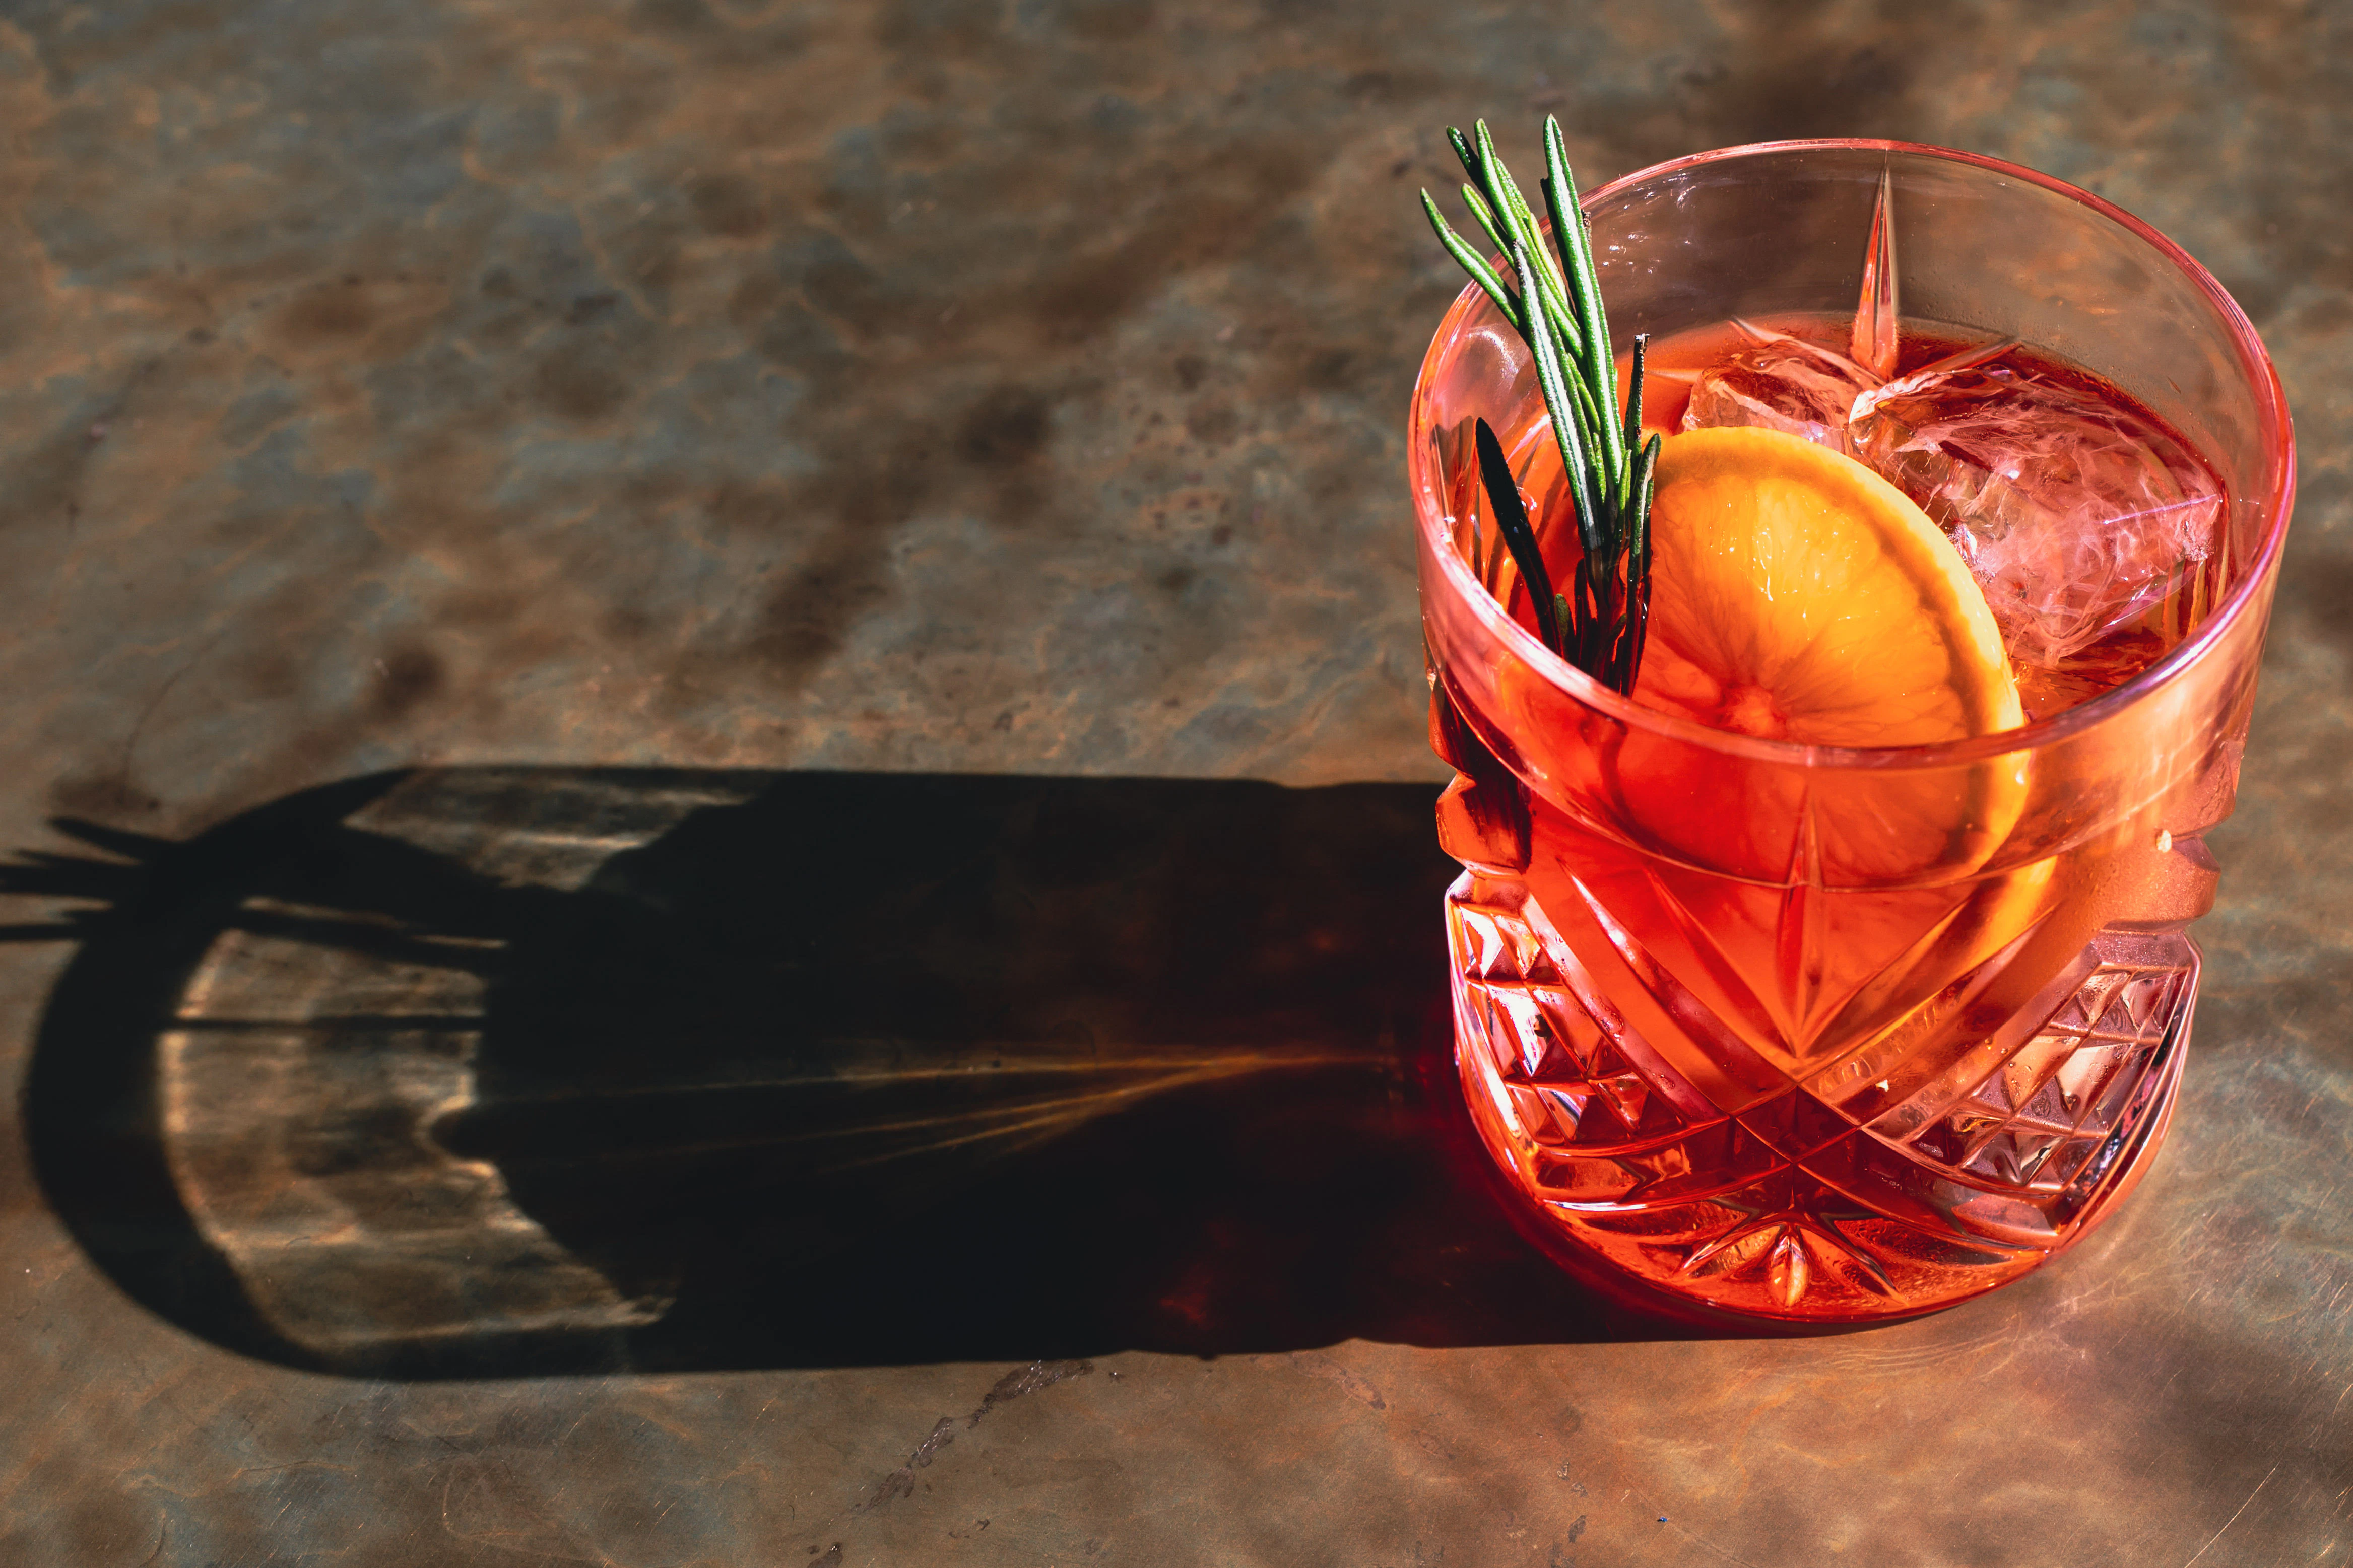 A red drink garnished with rosemary and a lice of orange.